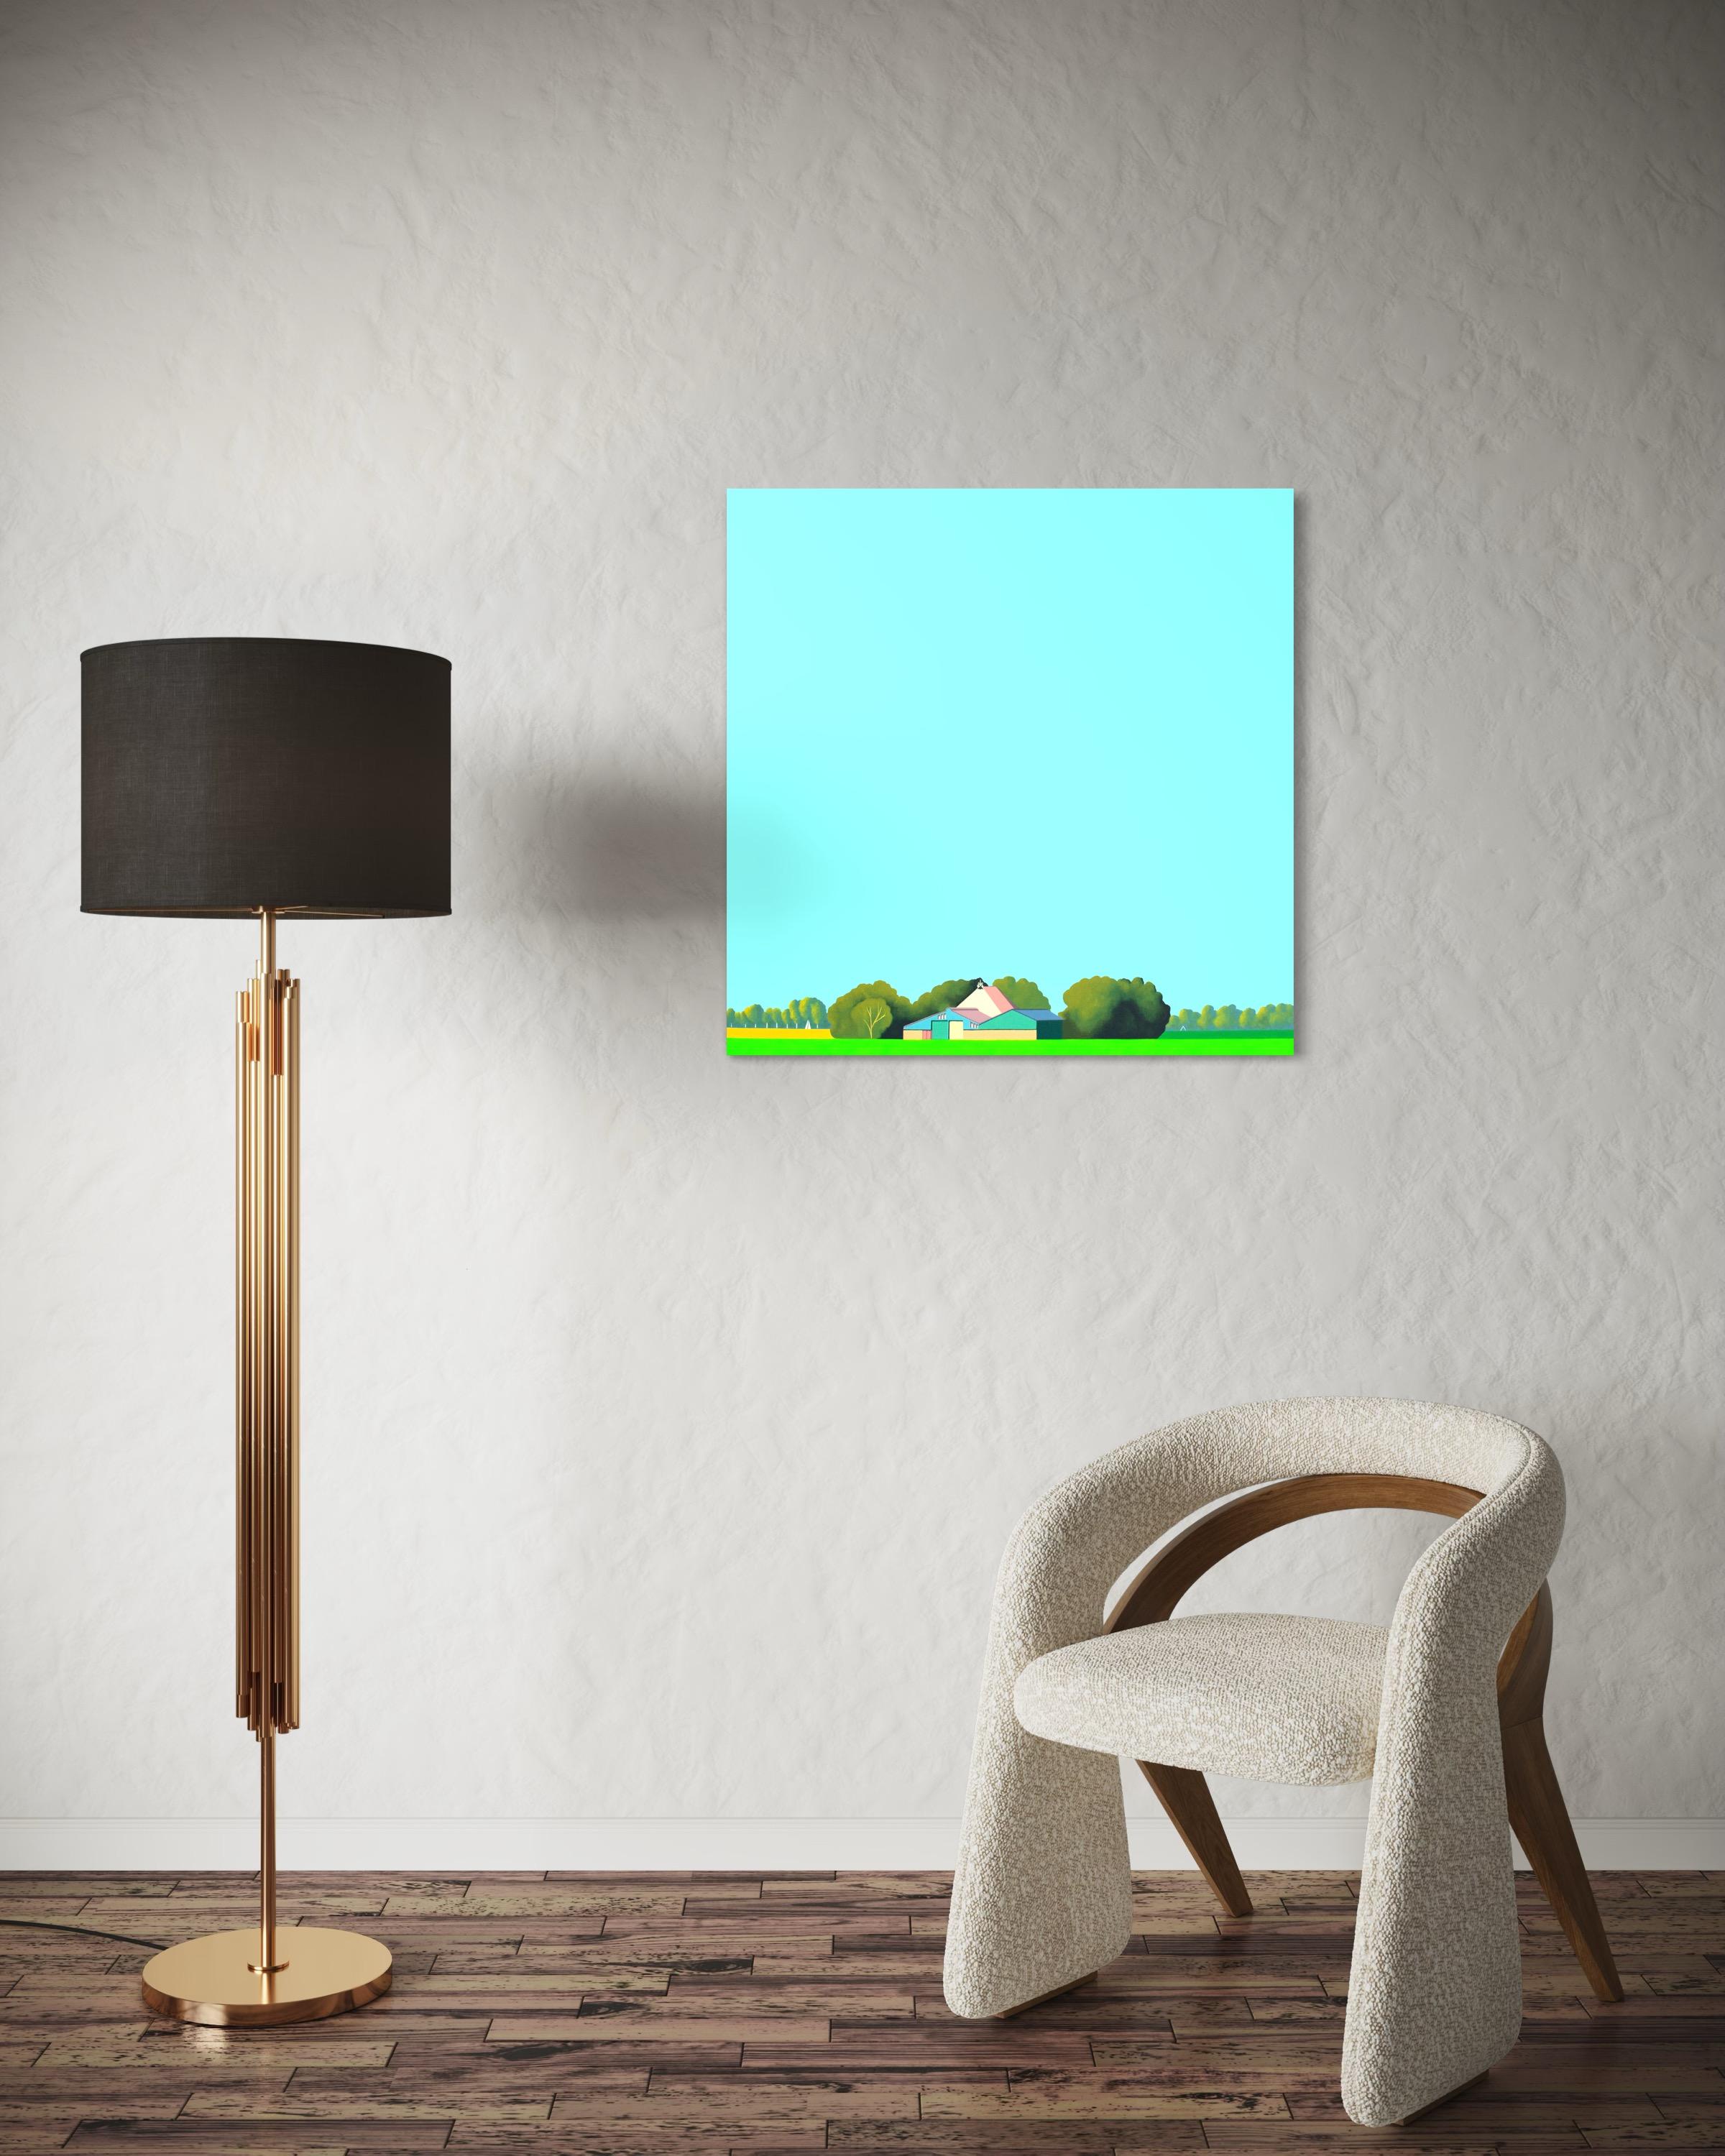 This beautiful painting by Jeroen Allart is part of his minimalist landscape painting he did in his home country the Netherlands.

IA farm stands before you on the horizon. A windmill majestically slices the blue sky. A bird, painted in taut